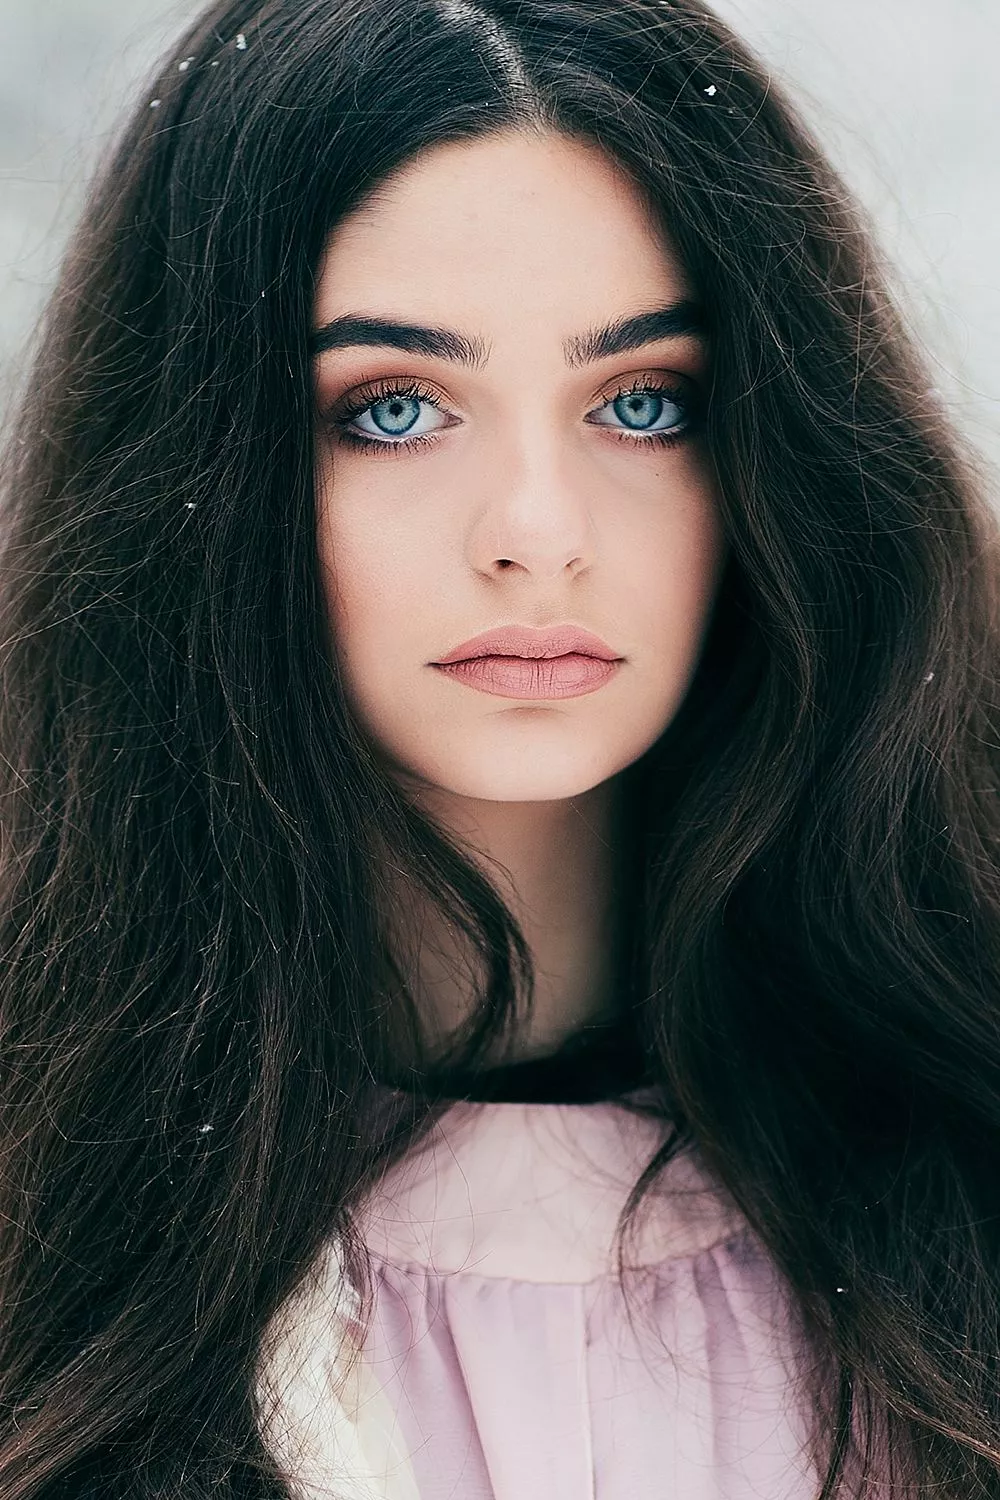 These Photographs of Blue Eyed Models by Jovana Rikalo Will Stop You in Your Tracks - These Photographs of Blue Eyed Models by Jovana Rikalo Will Stop You in Your Tracks -   13 beauty Eyes model ideas